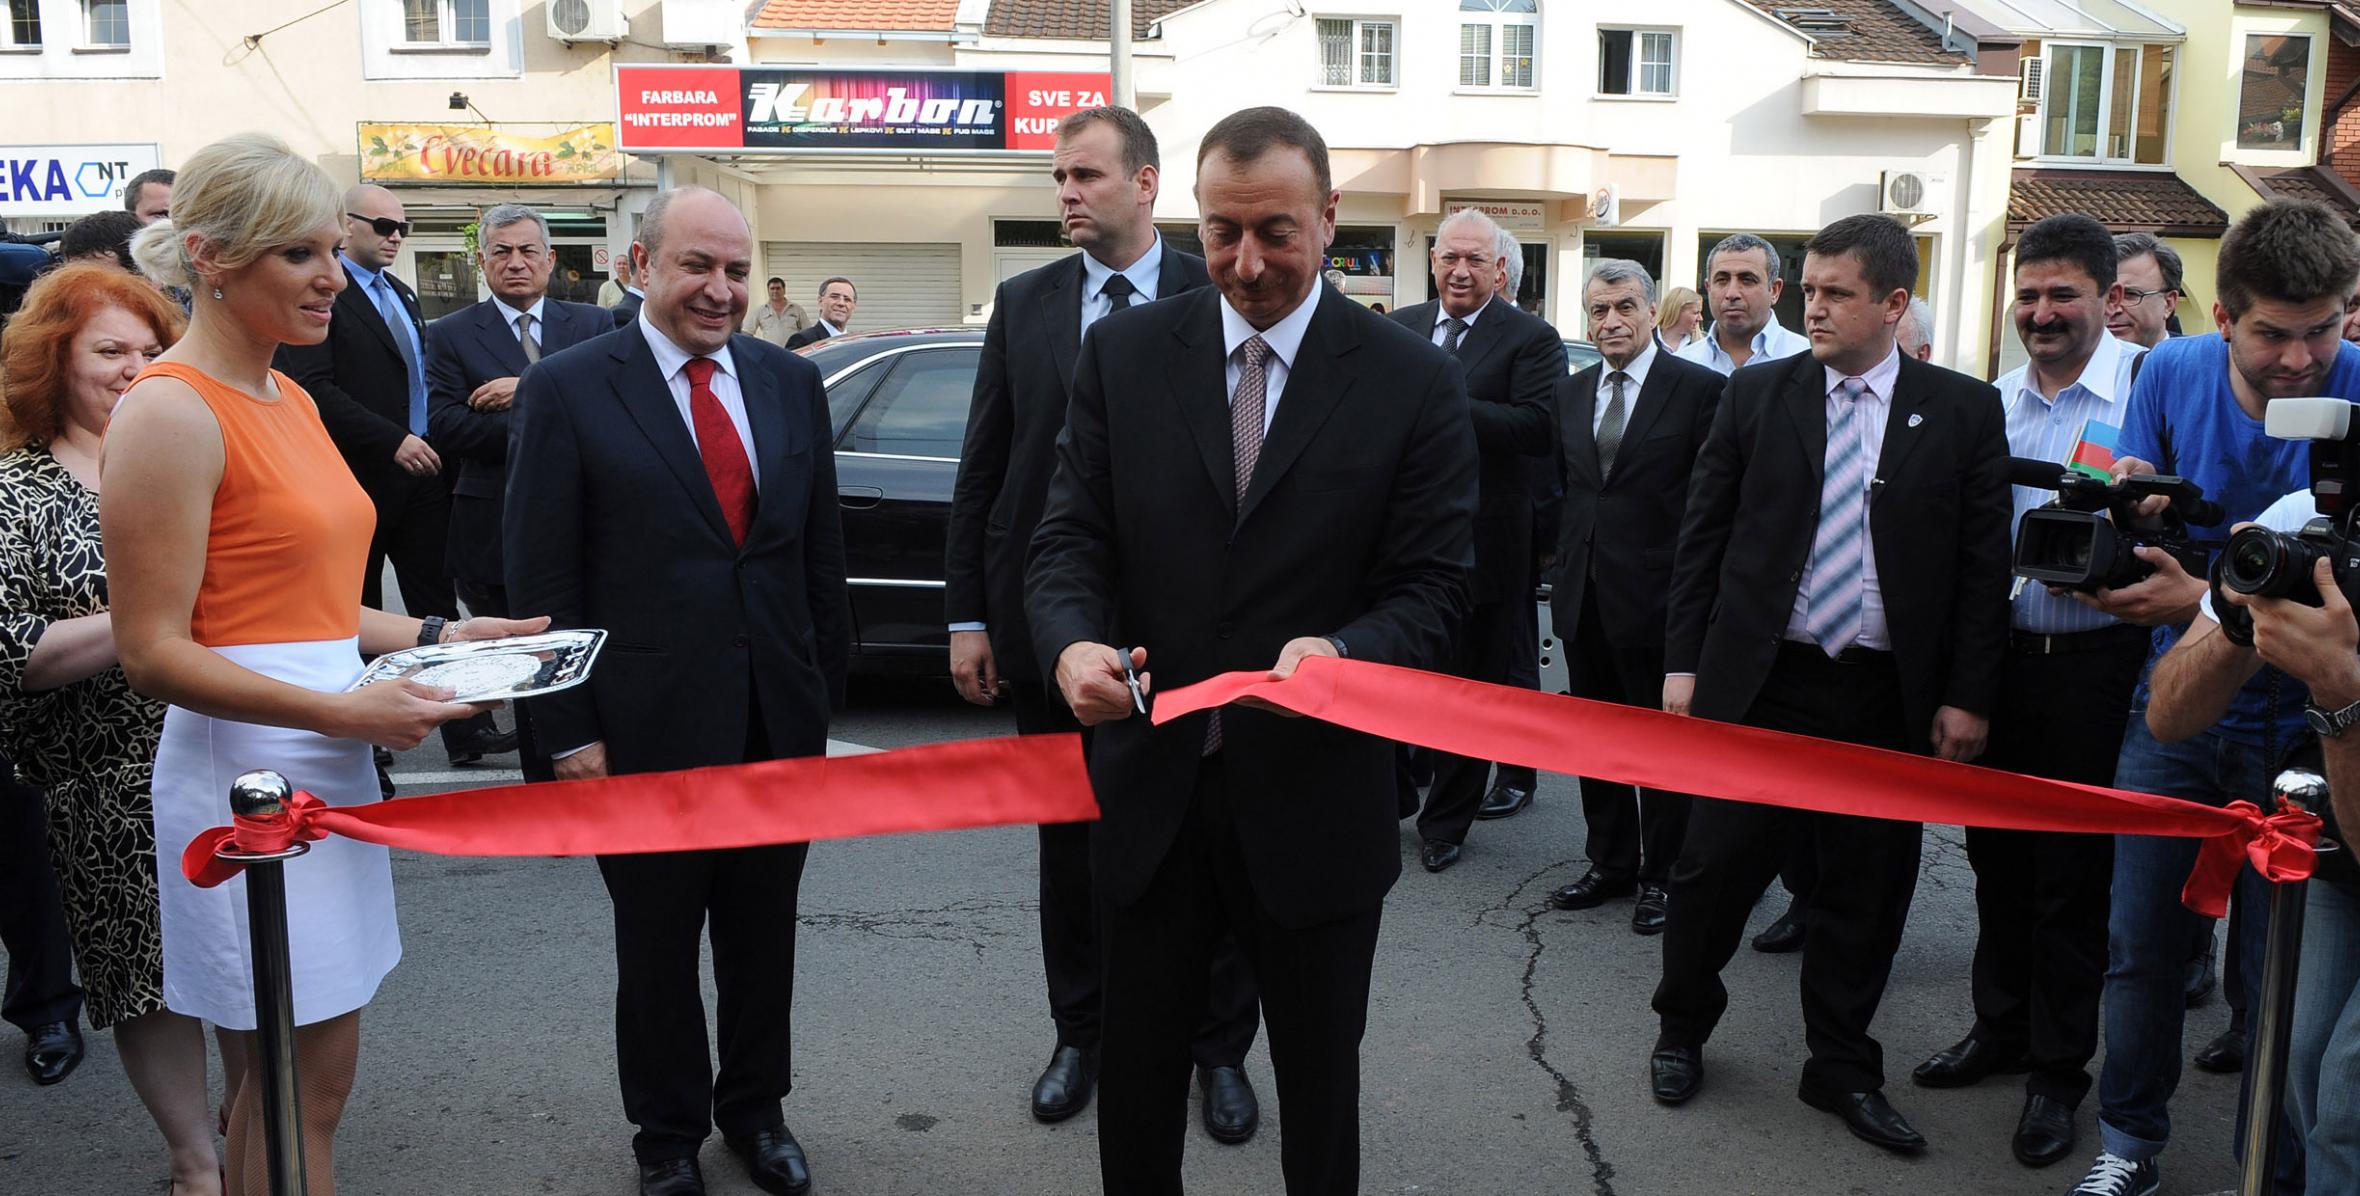 Ilham Aliyev attended the opening of the Azerbaijani Embassy in Serbia